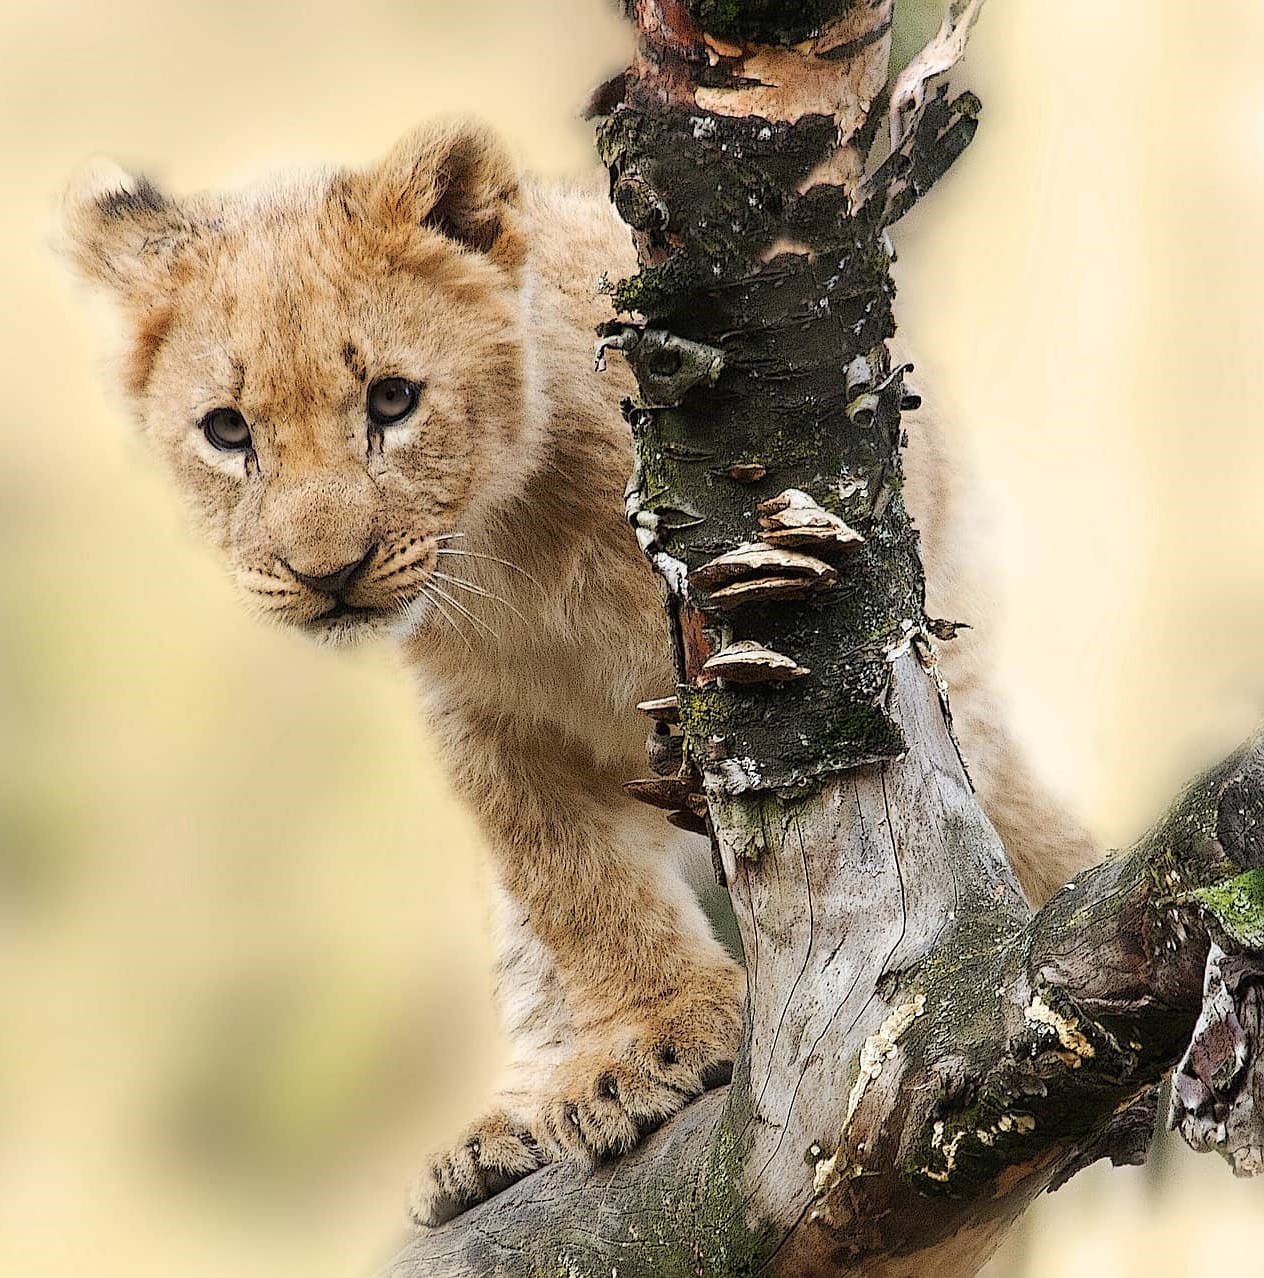 Want to know more fascinating African lions facts?